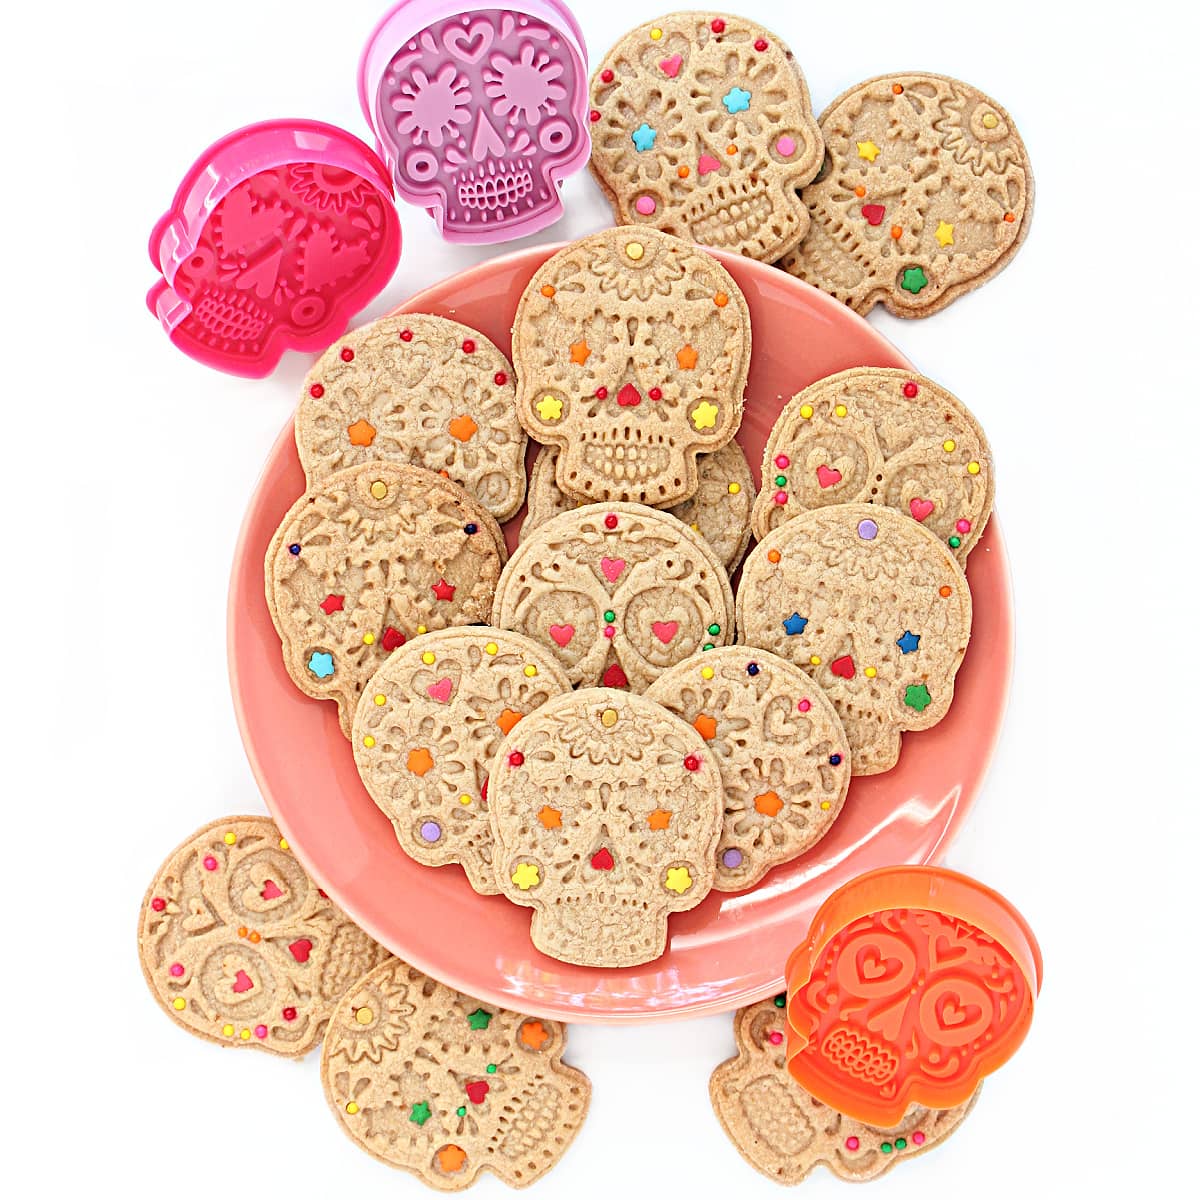 Calavera Skull cookies with the face embossed.